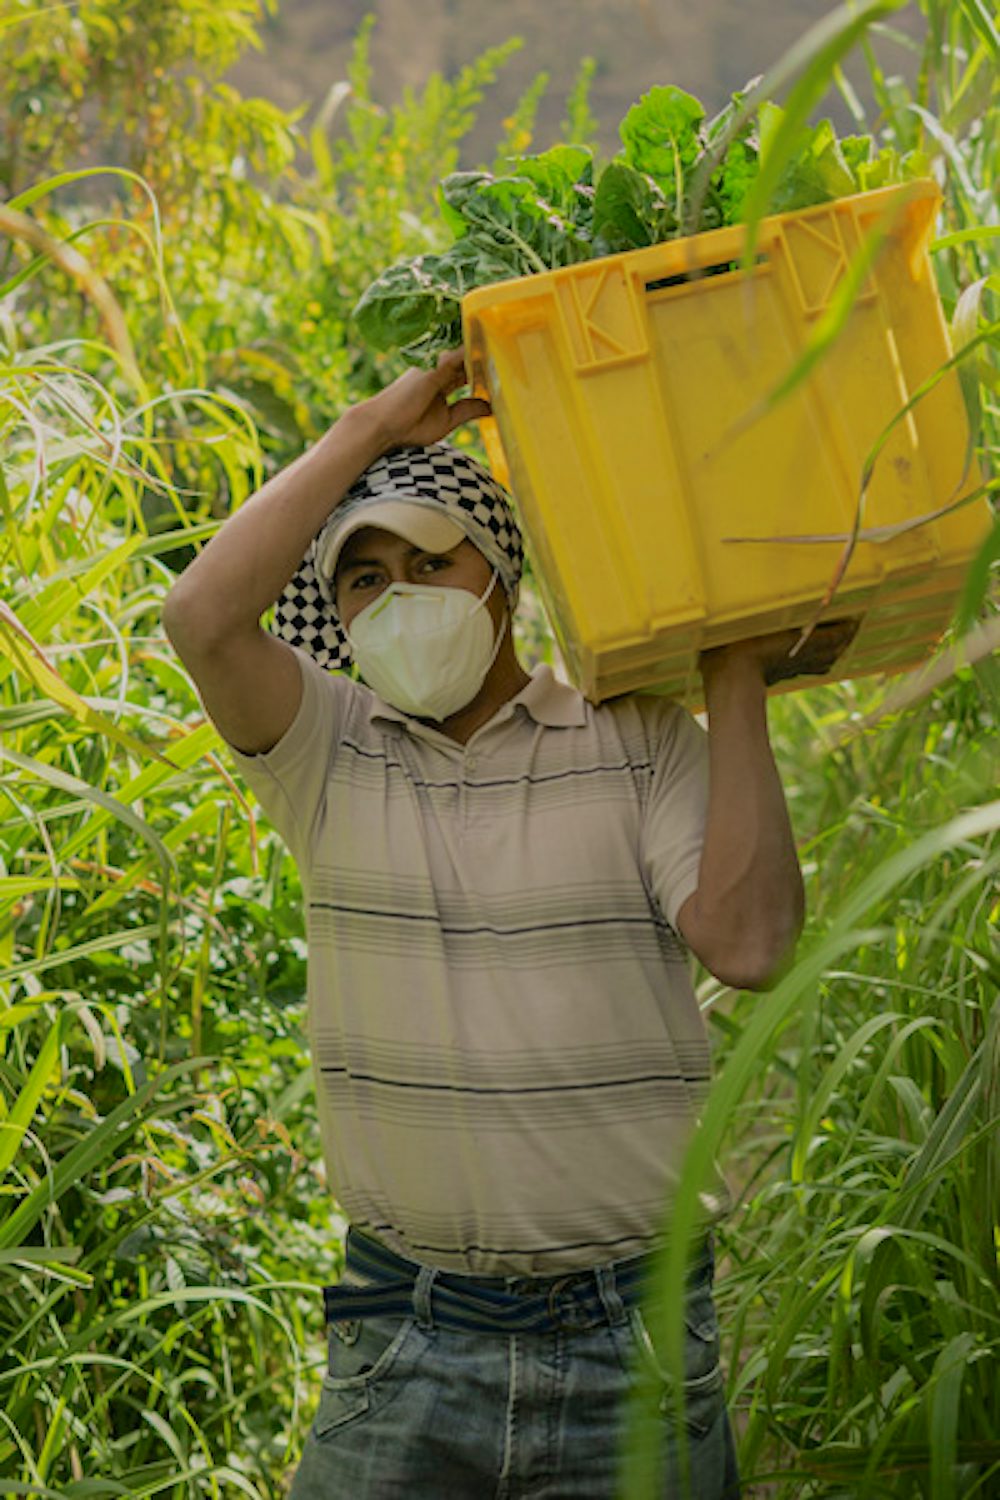 man carries basket of food through a field while wearing a mask